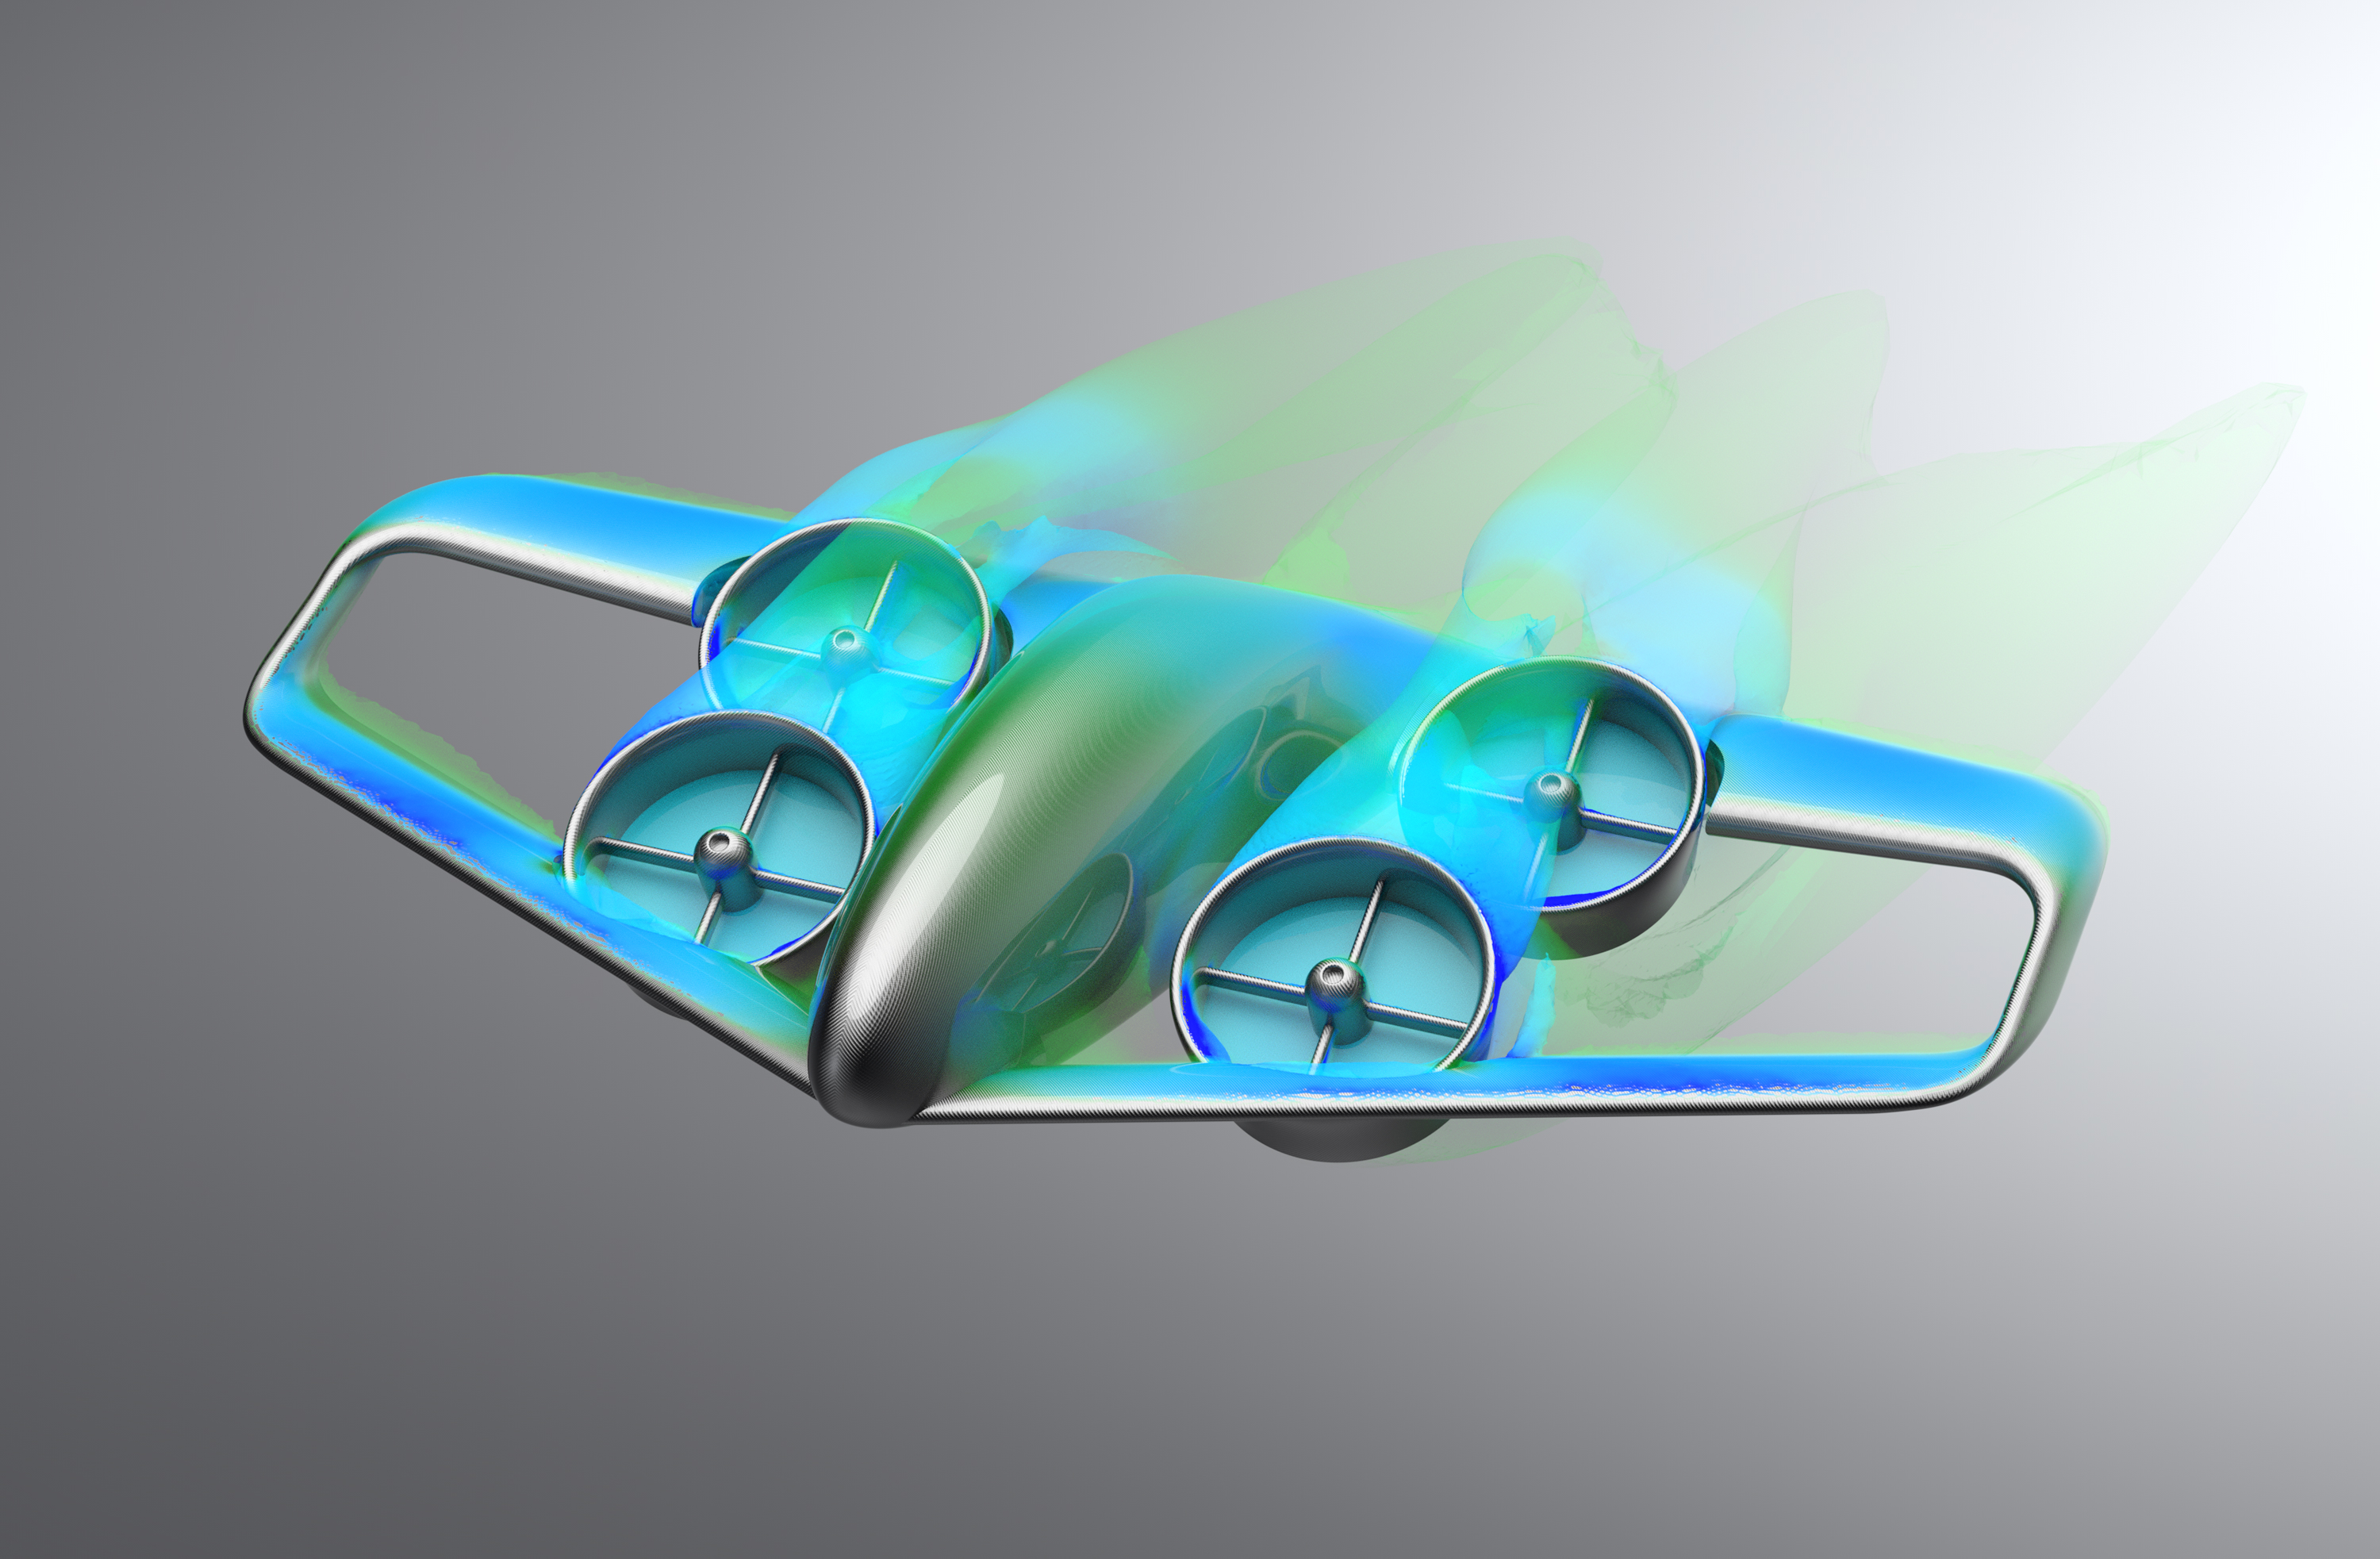 GKN will be researching large electric Vertical Take-Off & Landing (eVTOL) vehicles.